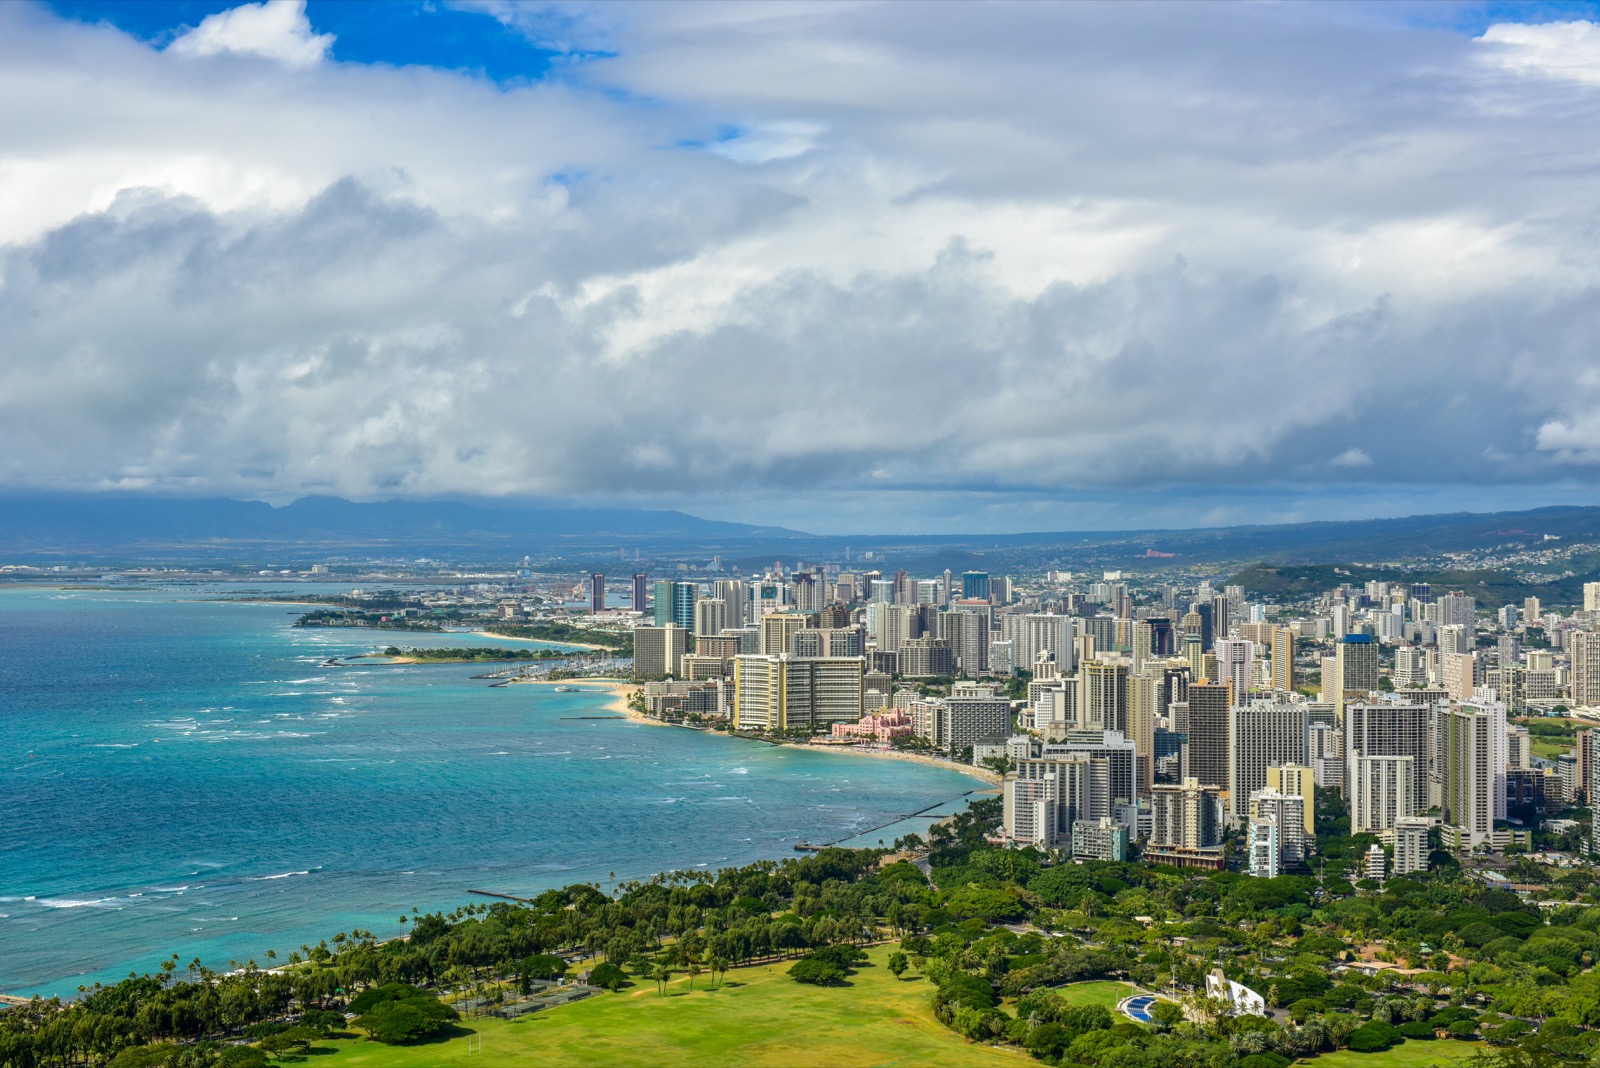 Can We Guess If You’re a Boomer, Gen X’er, Millennial or Gen Z’er Just Based on Your ✈️ Travel Preferences? Honolulu, Hawaii